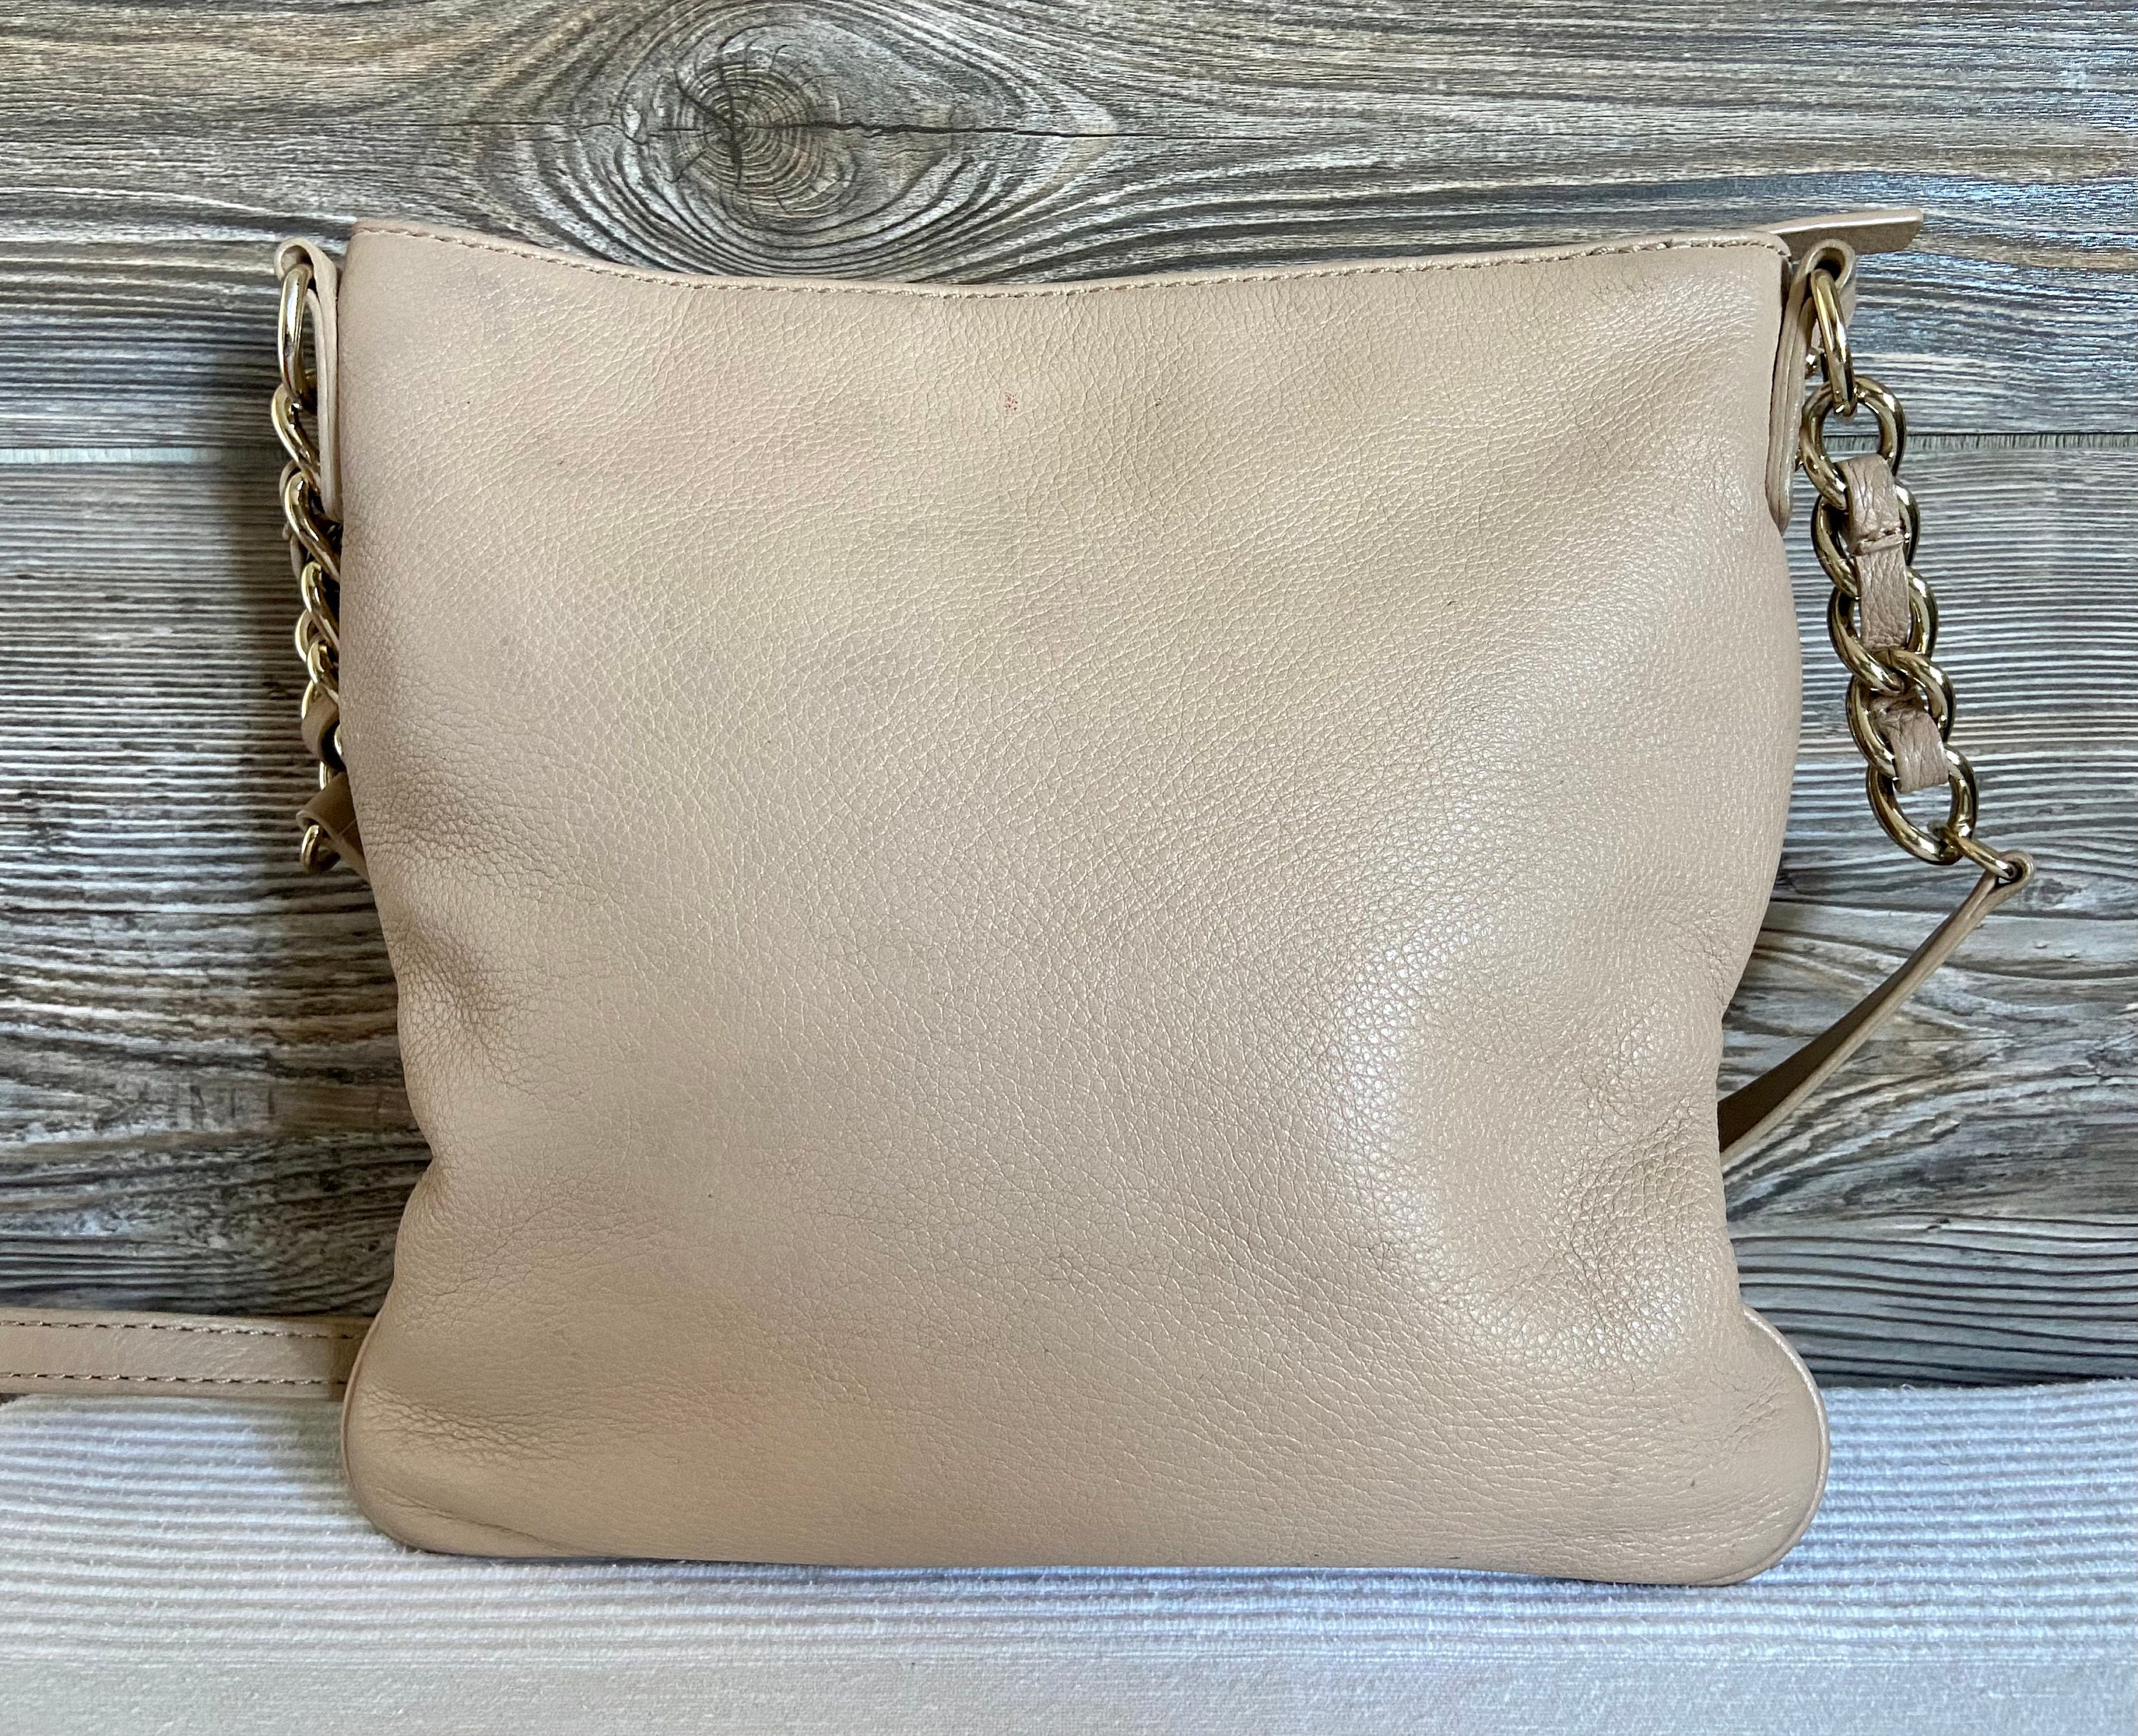 Leather crossbody bag Kate Spade Beige in Leather - 37424643